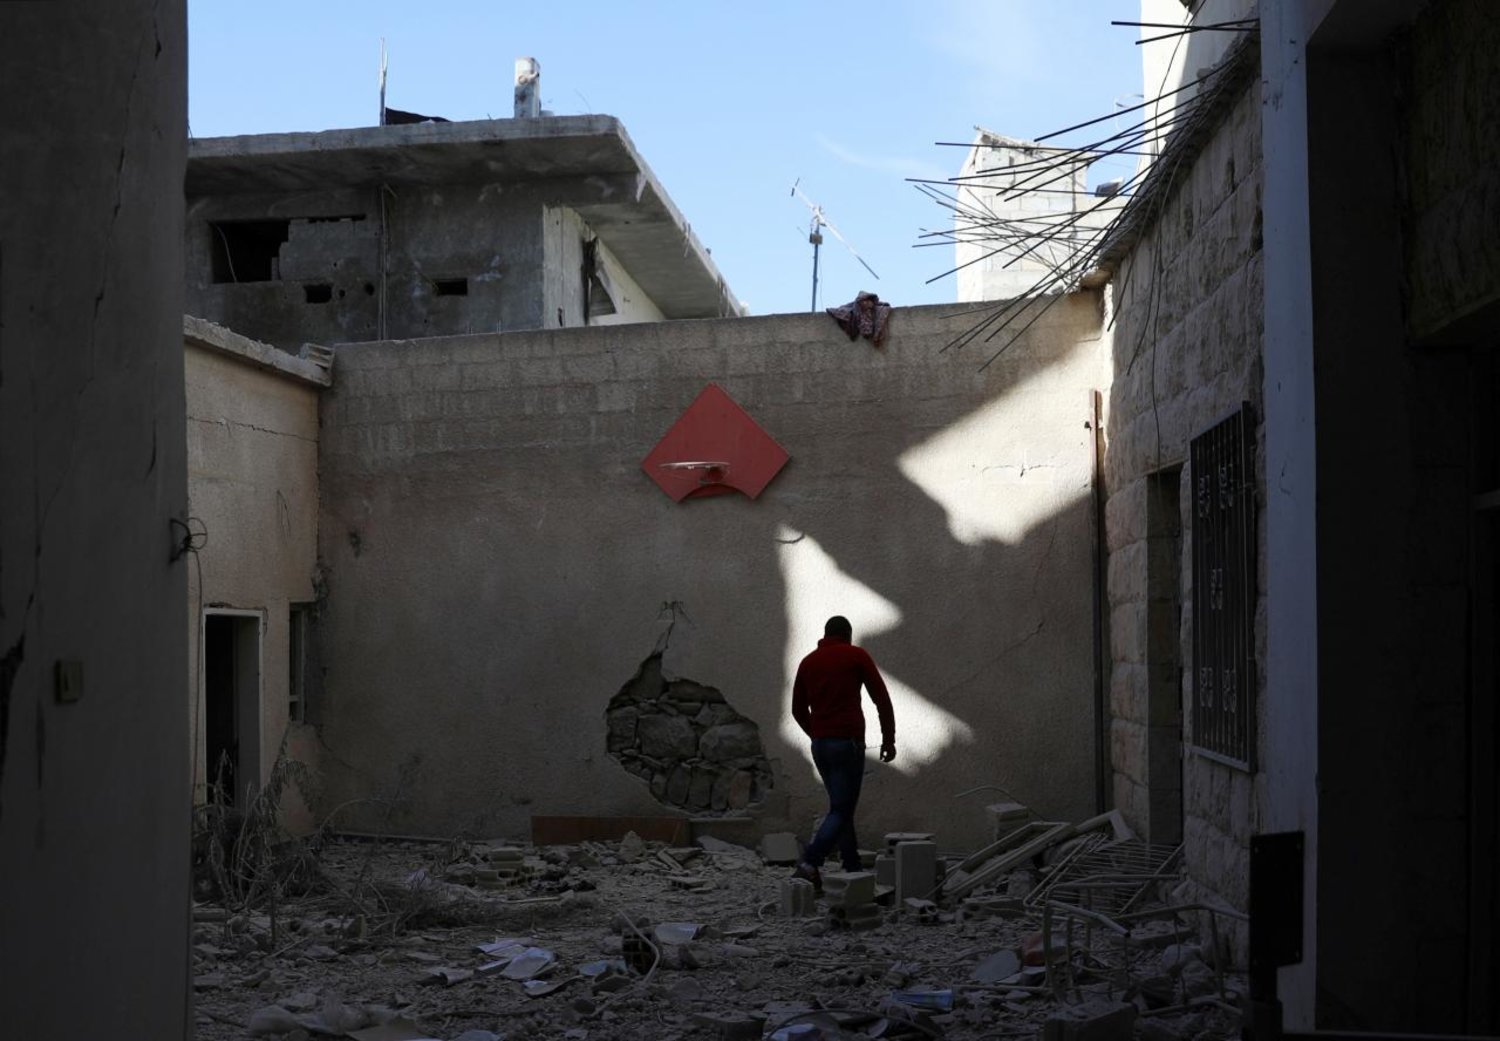 A man walks at a damaged site in the rebel-held area, in the city of Deraa, Syria December 12, 2017. Reuters